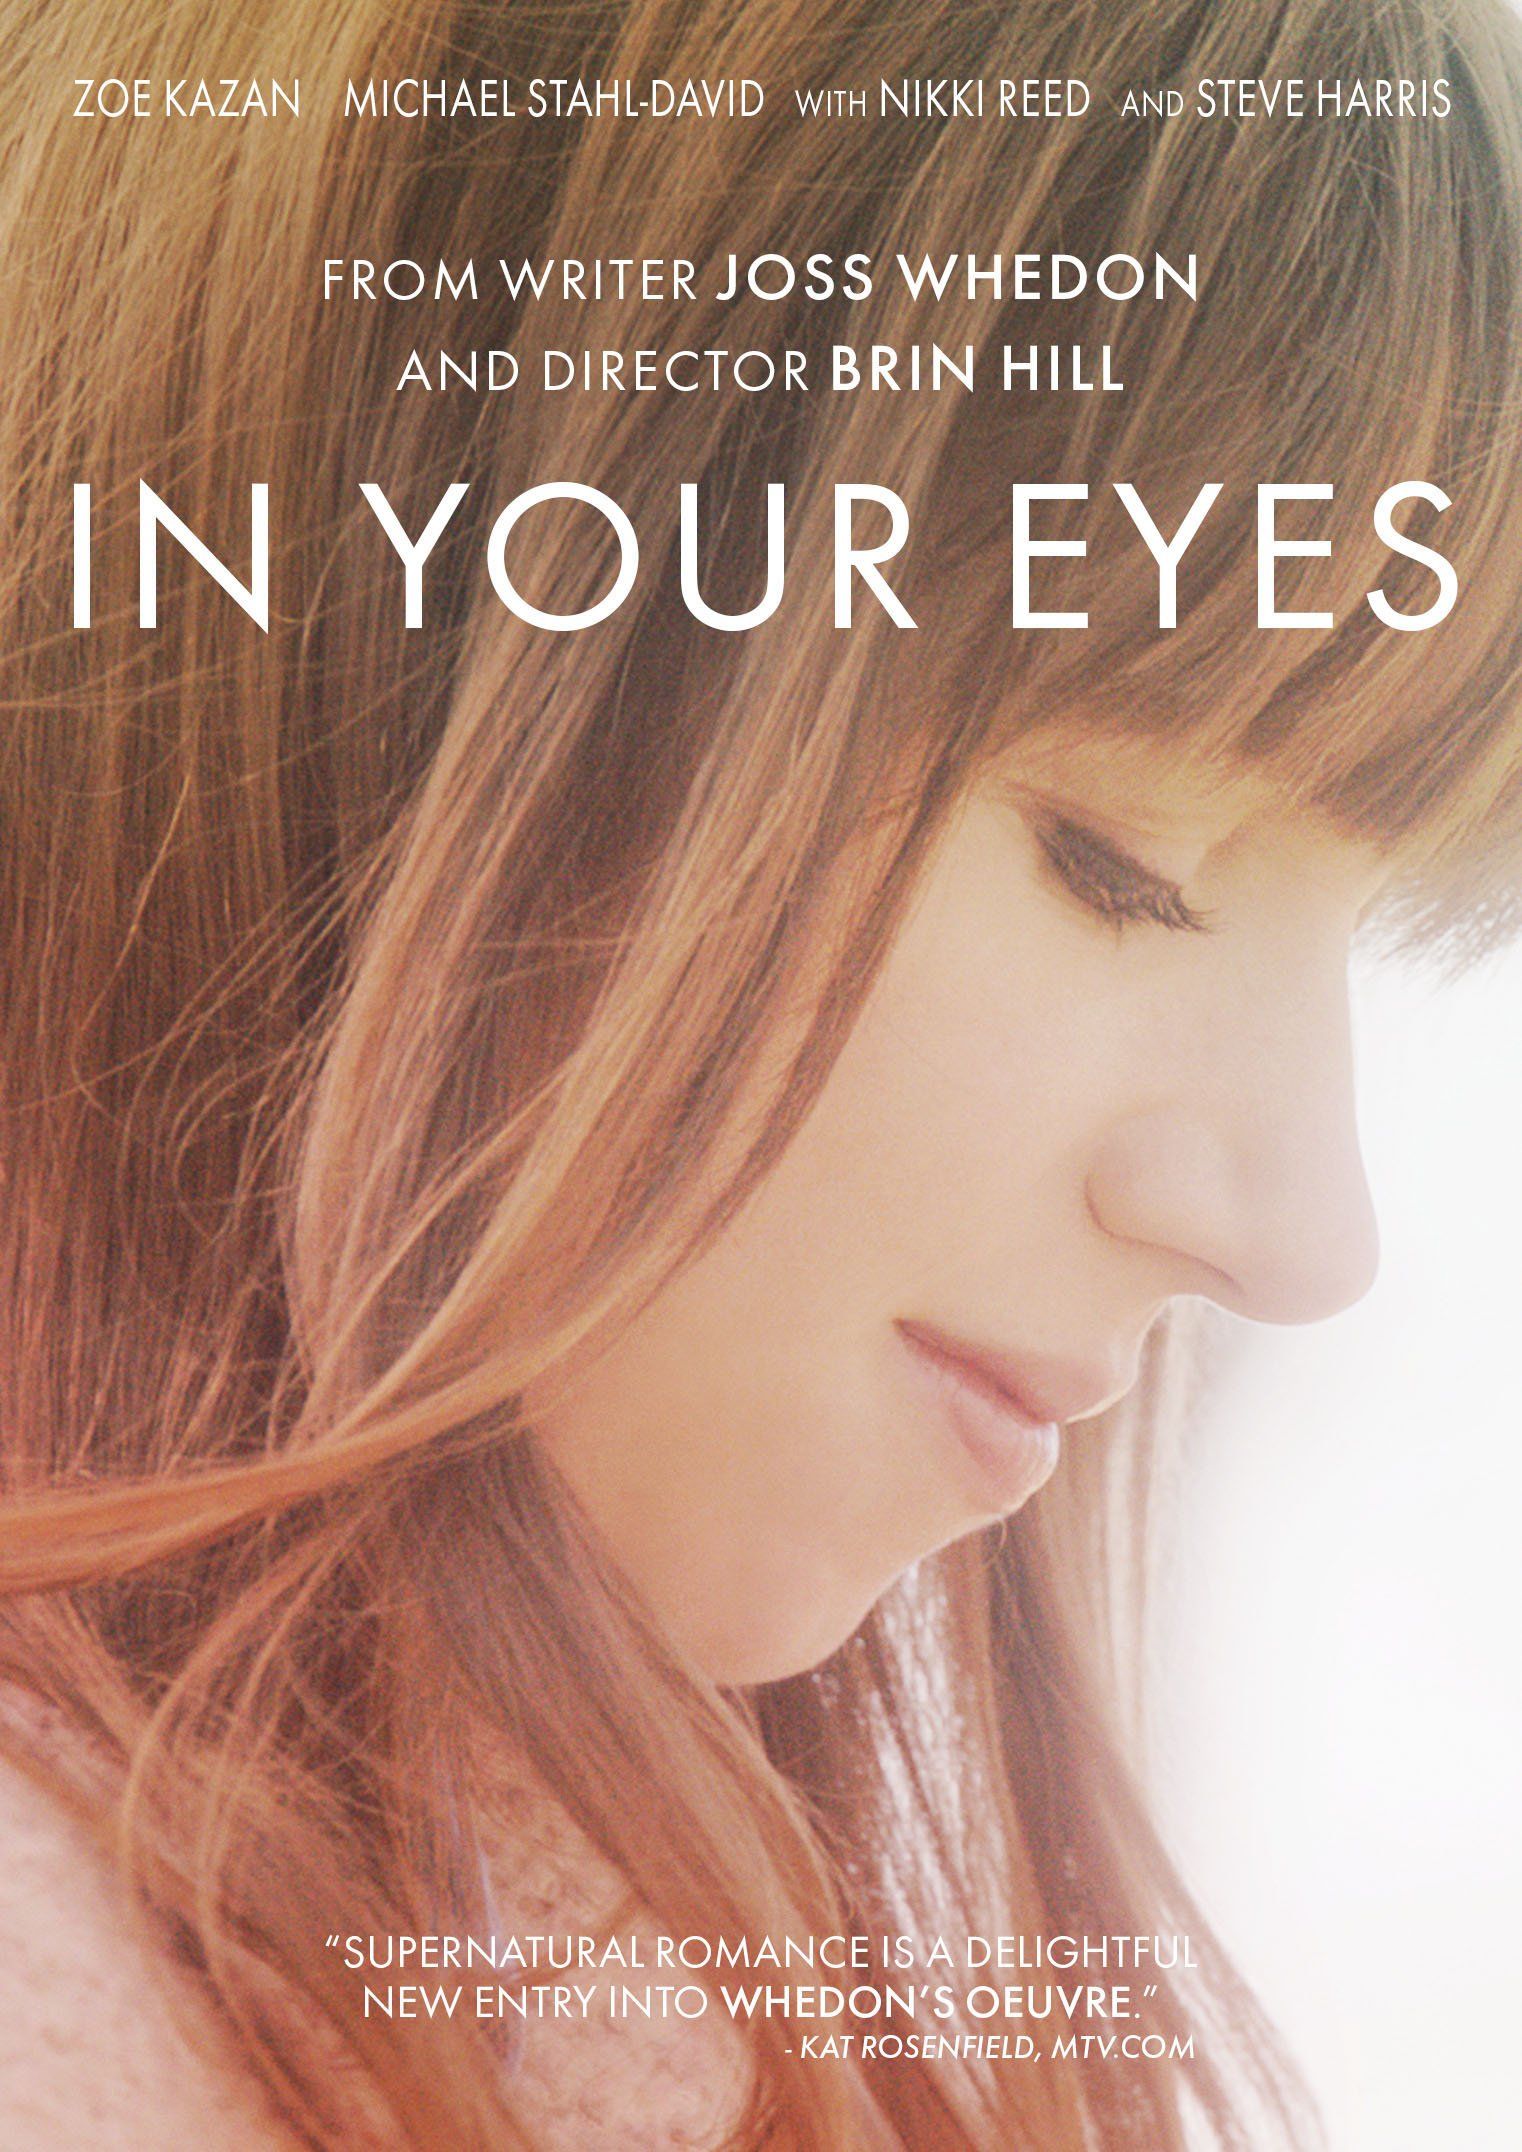 in-your-eyes-dvd-cover-33.jpg